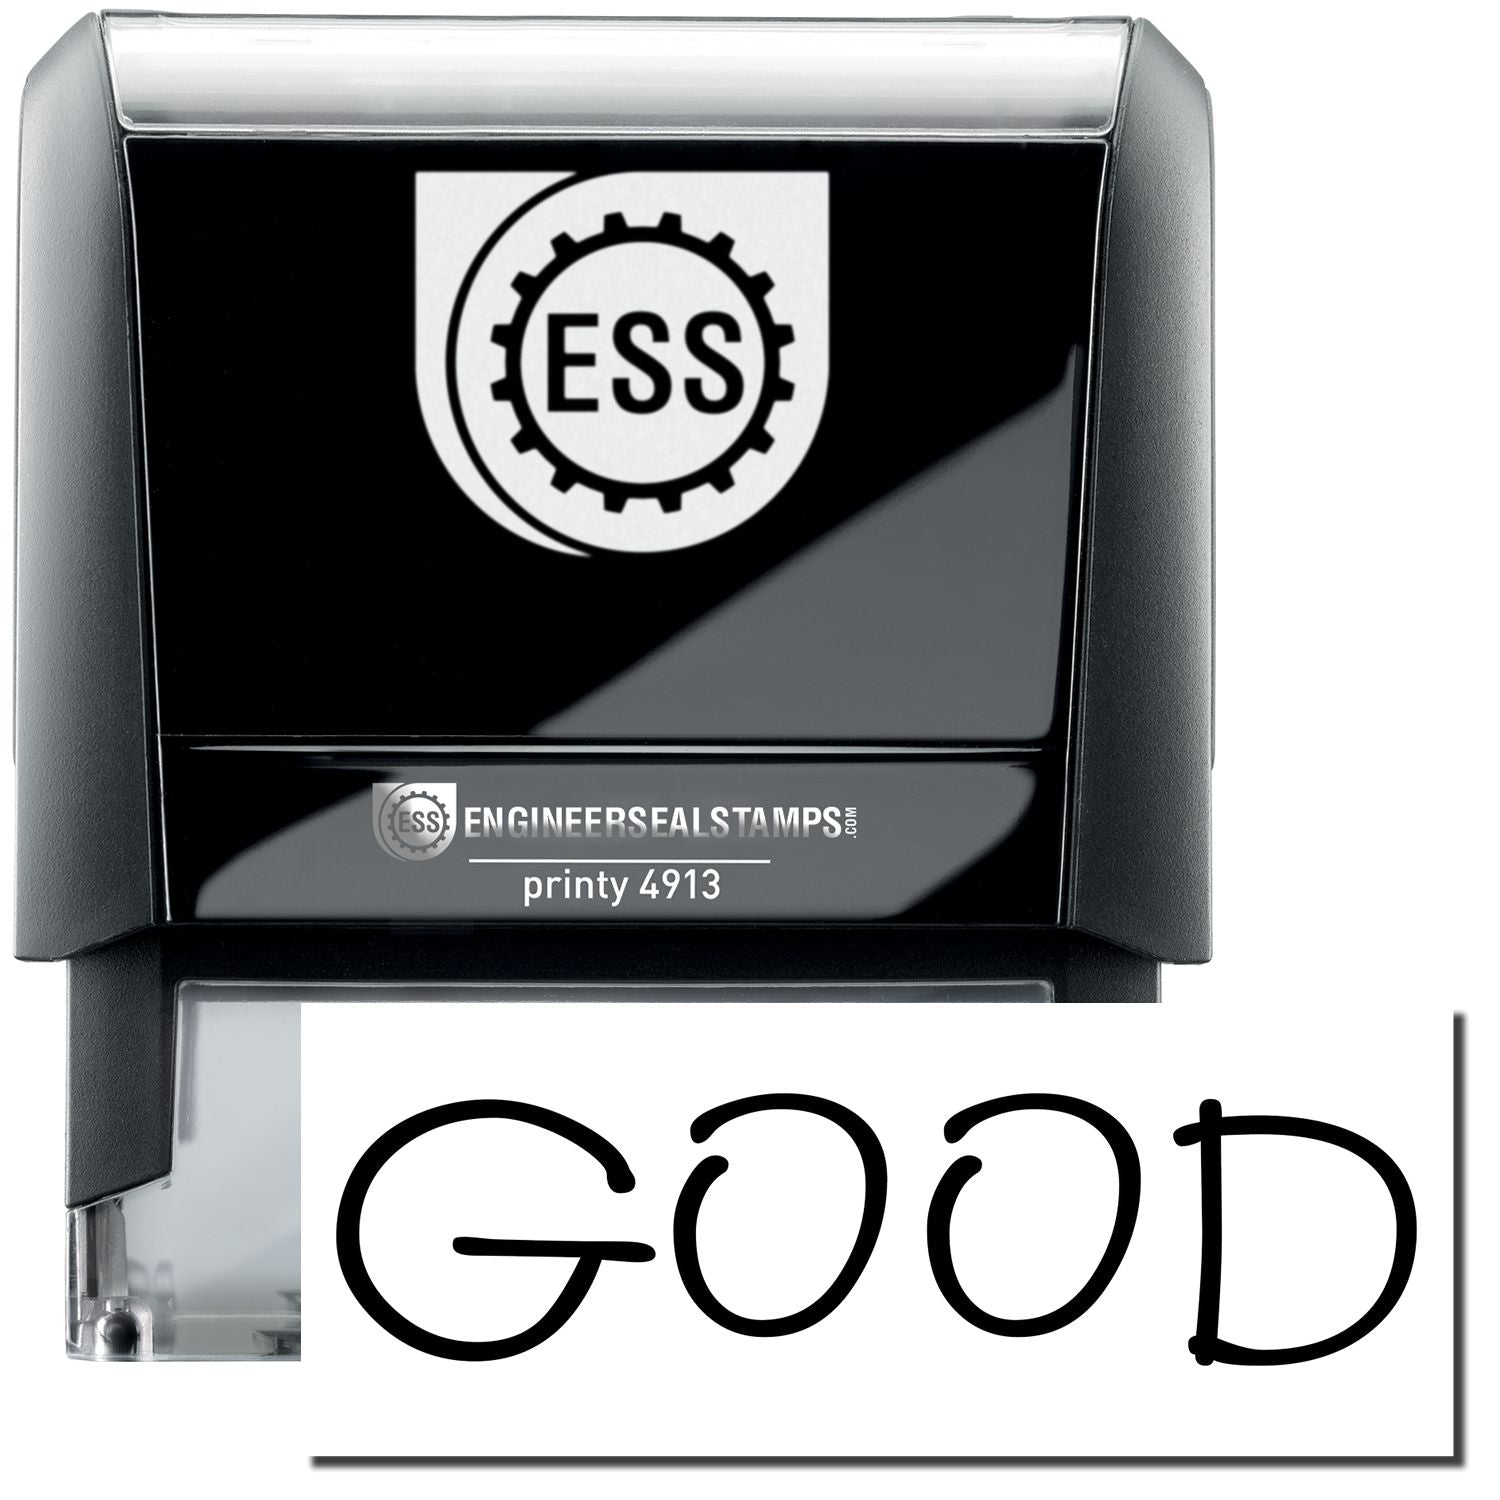 A self-inking stamp with a stamped image showing how the text "GOOD" in a large unique font is displayed by it.